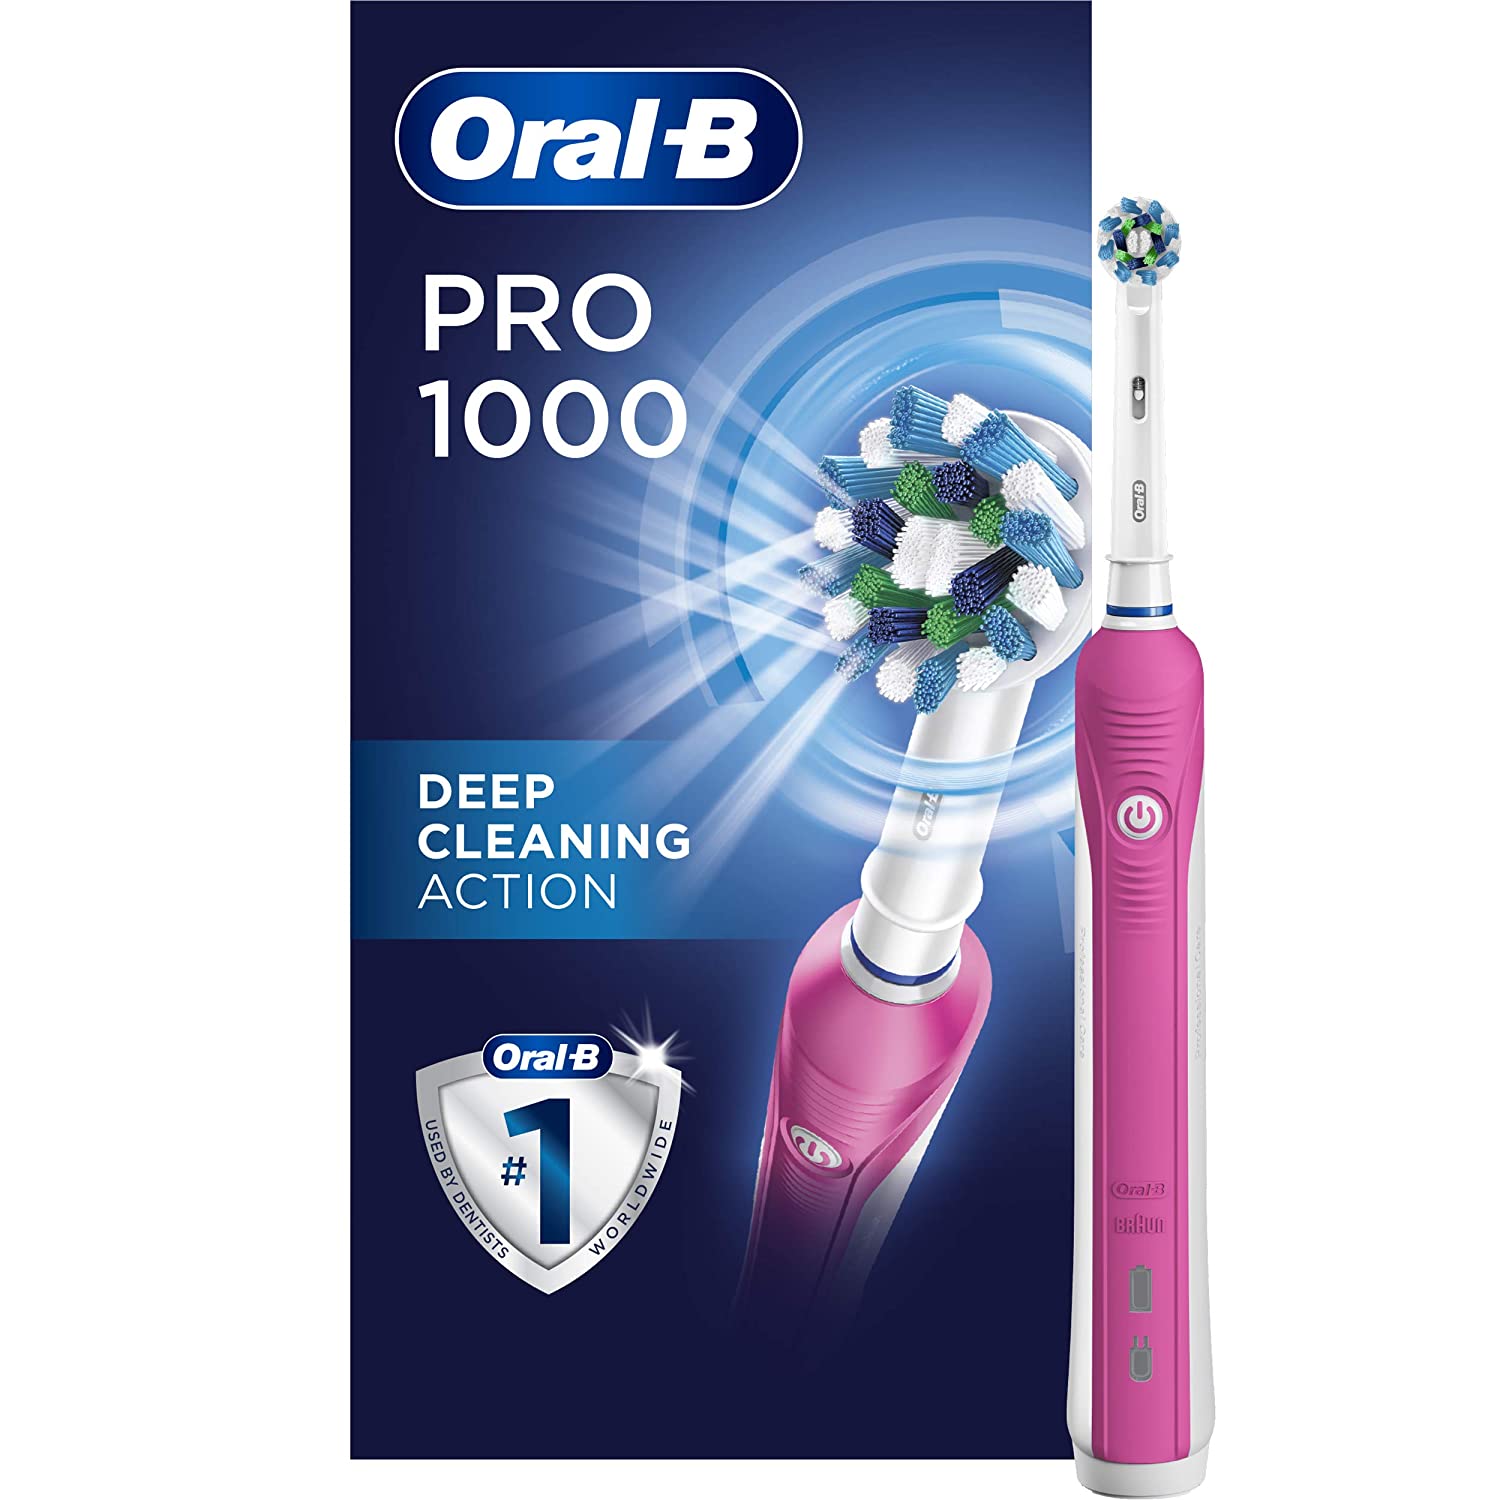 Oral-B Pro 1000 CrossAction Electric Toothbrush - Pink